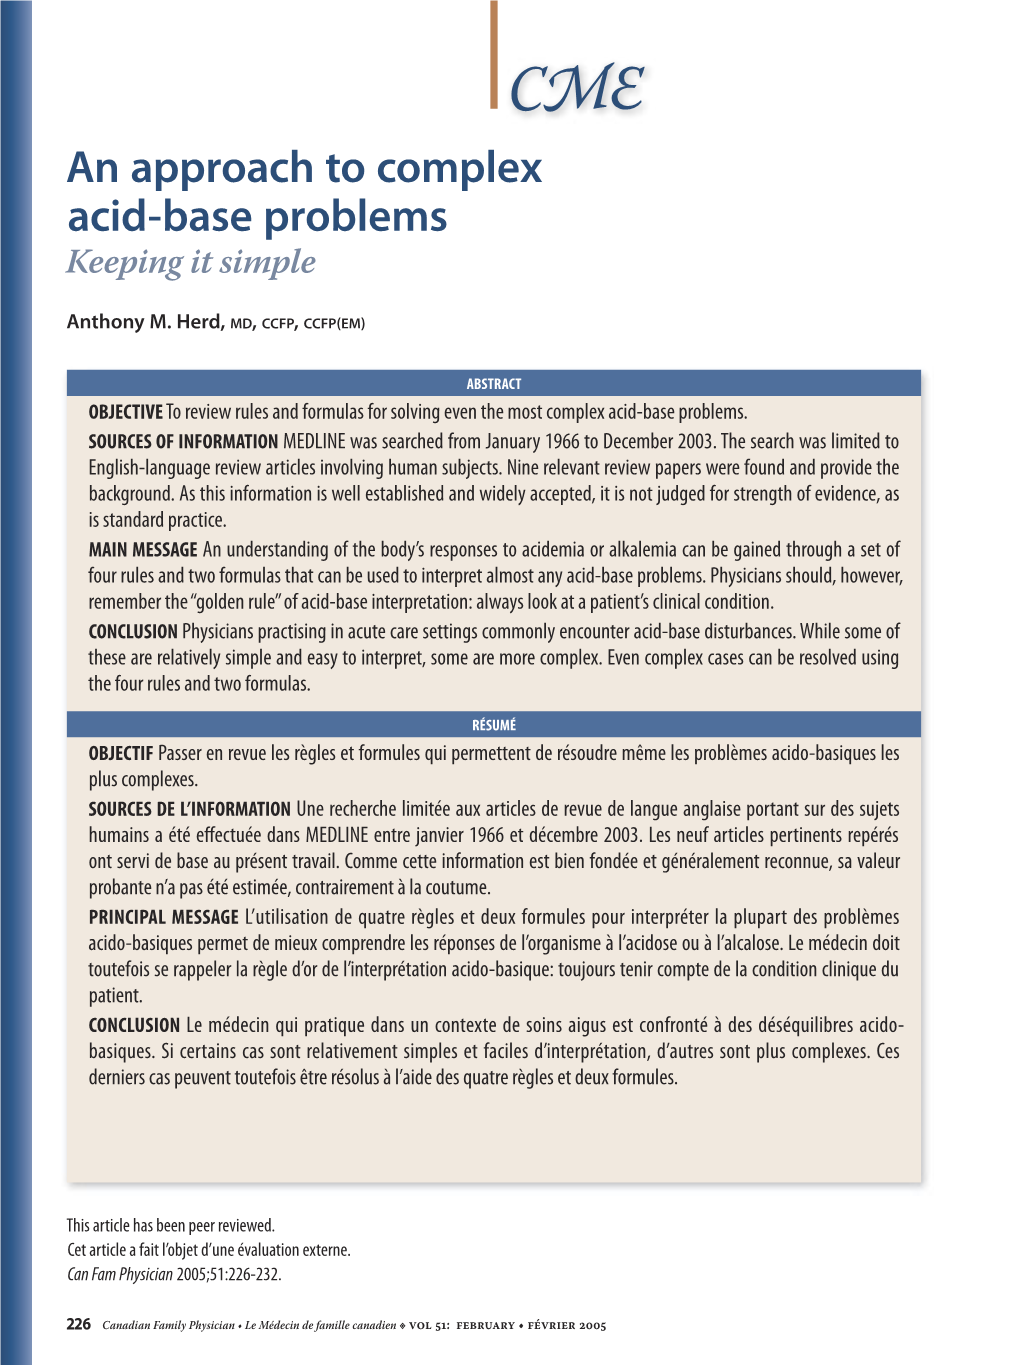 An Approach to Complex Acid-Base Problems Keeping It Simple